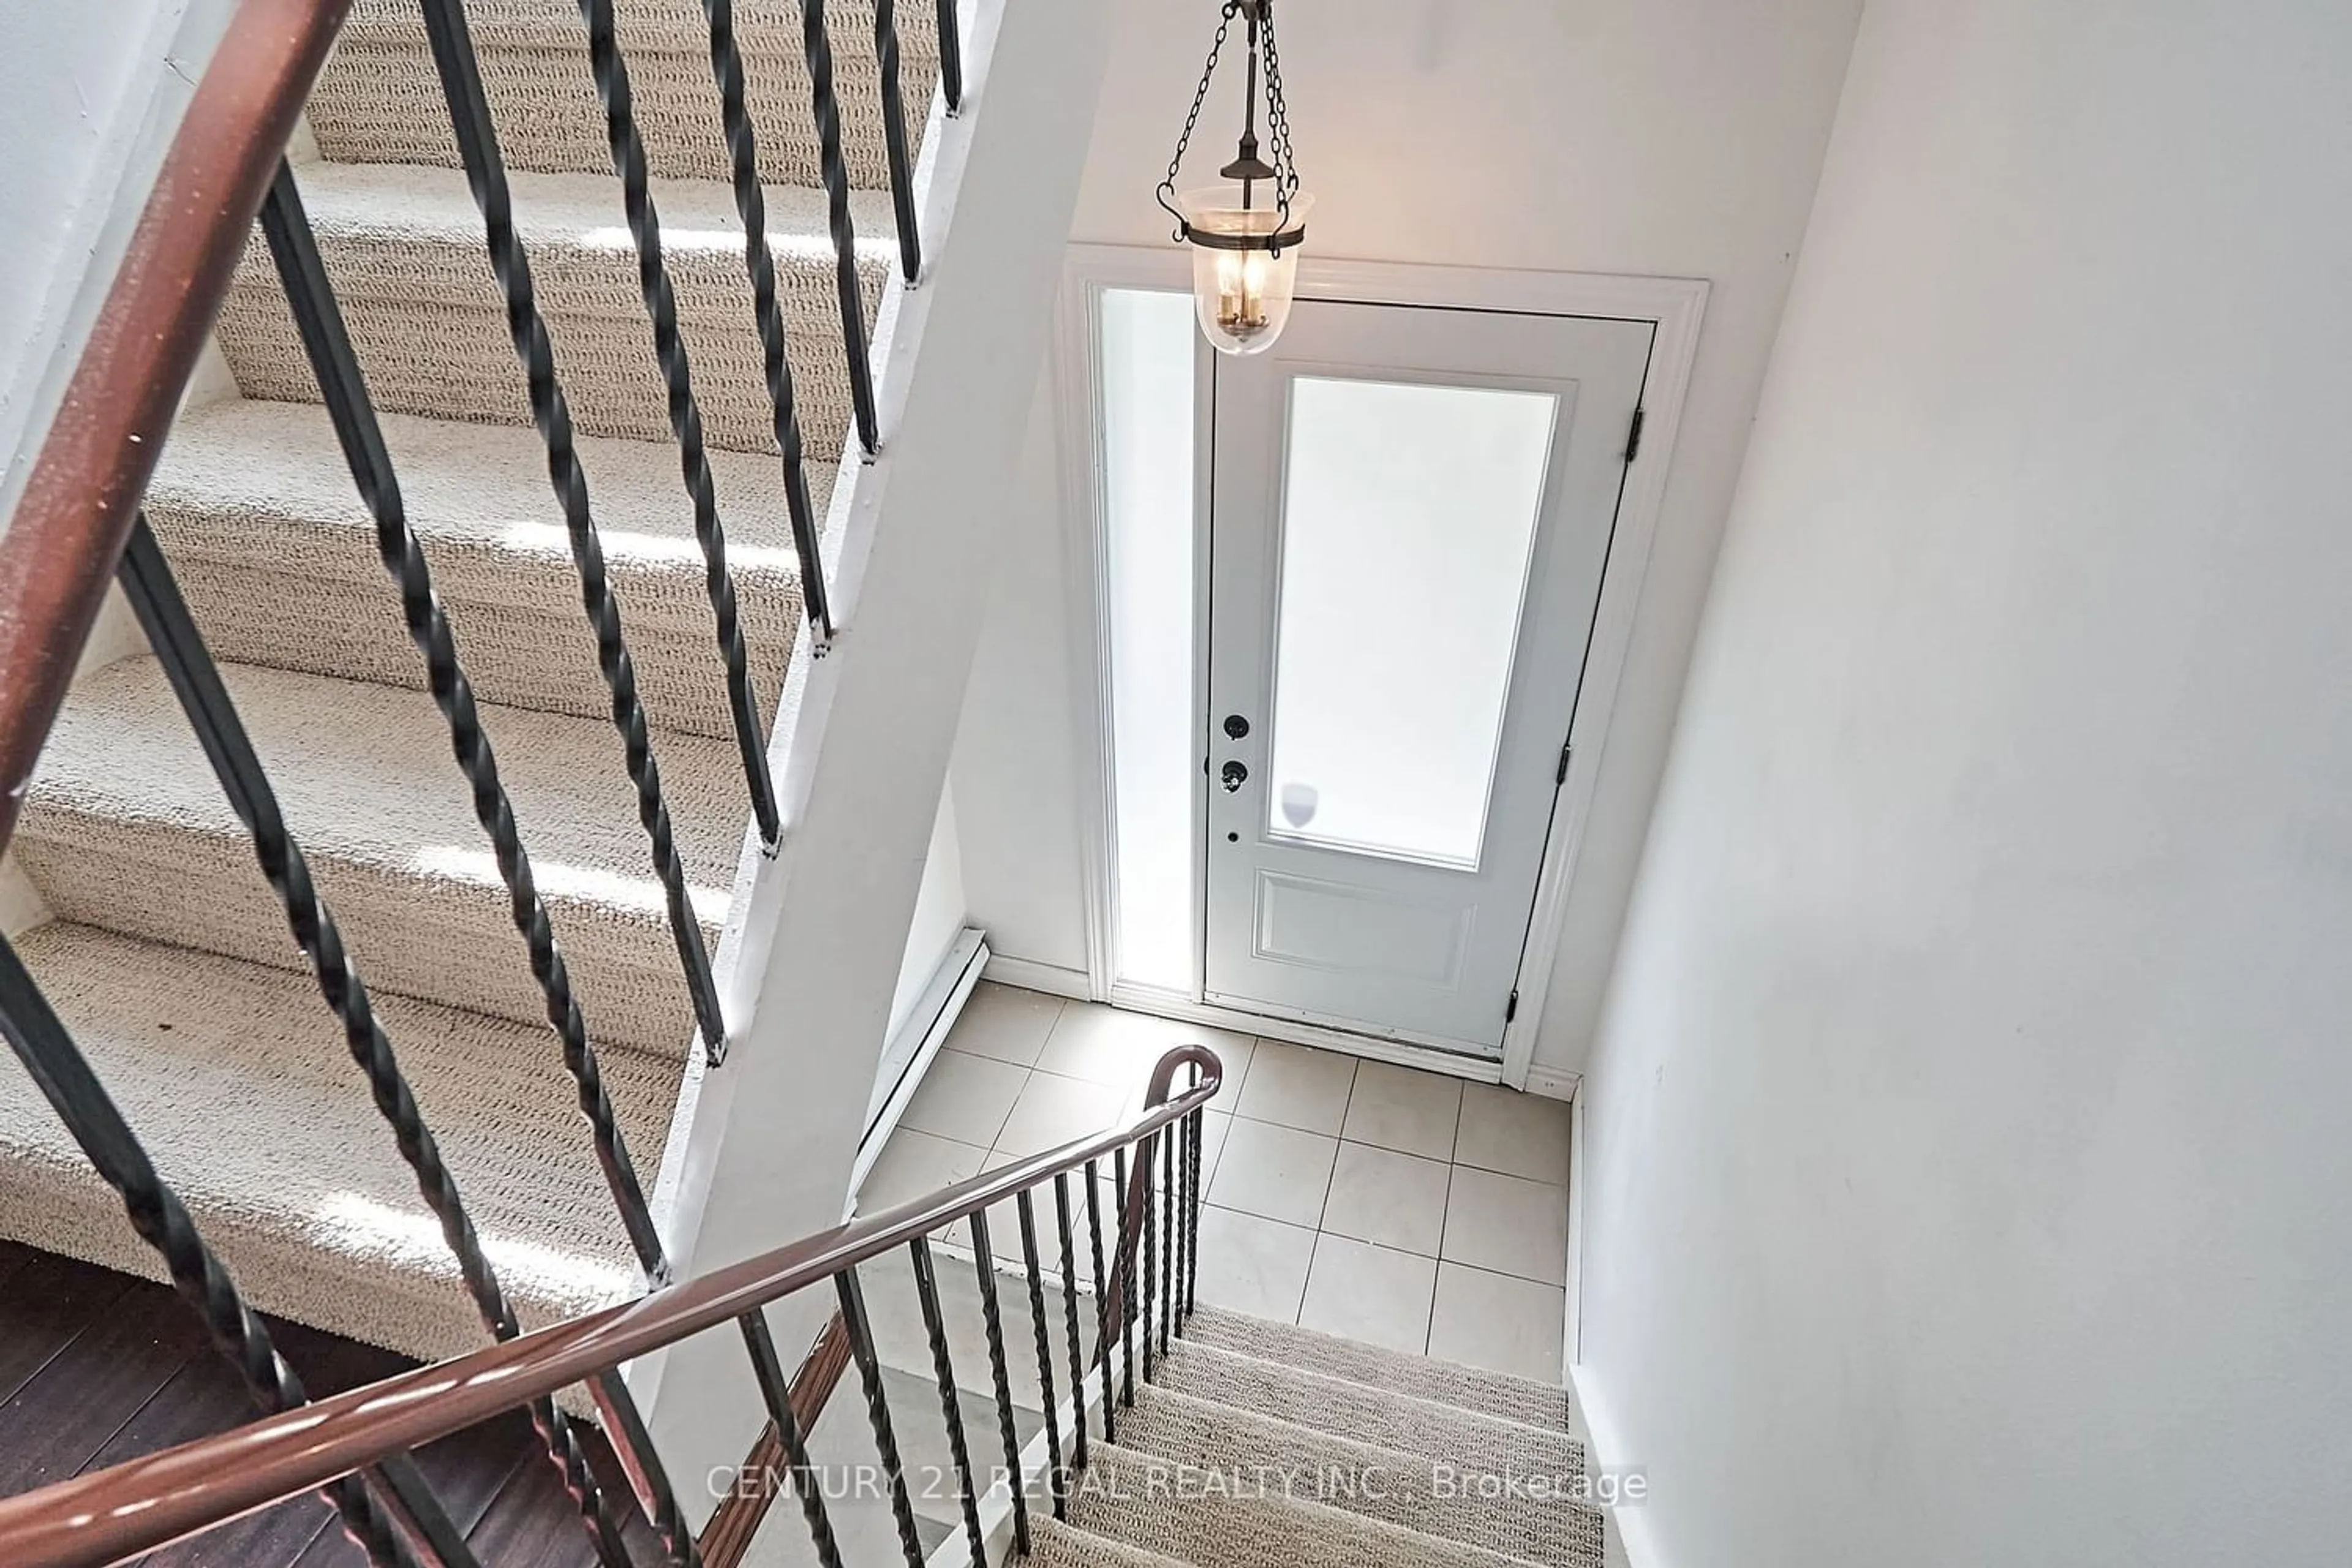 Stairs for 837 Craven Rd, Toronto Ontario M4L 2Z6